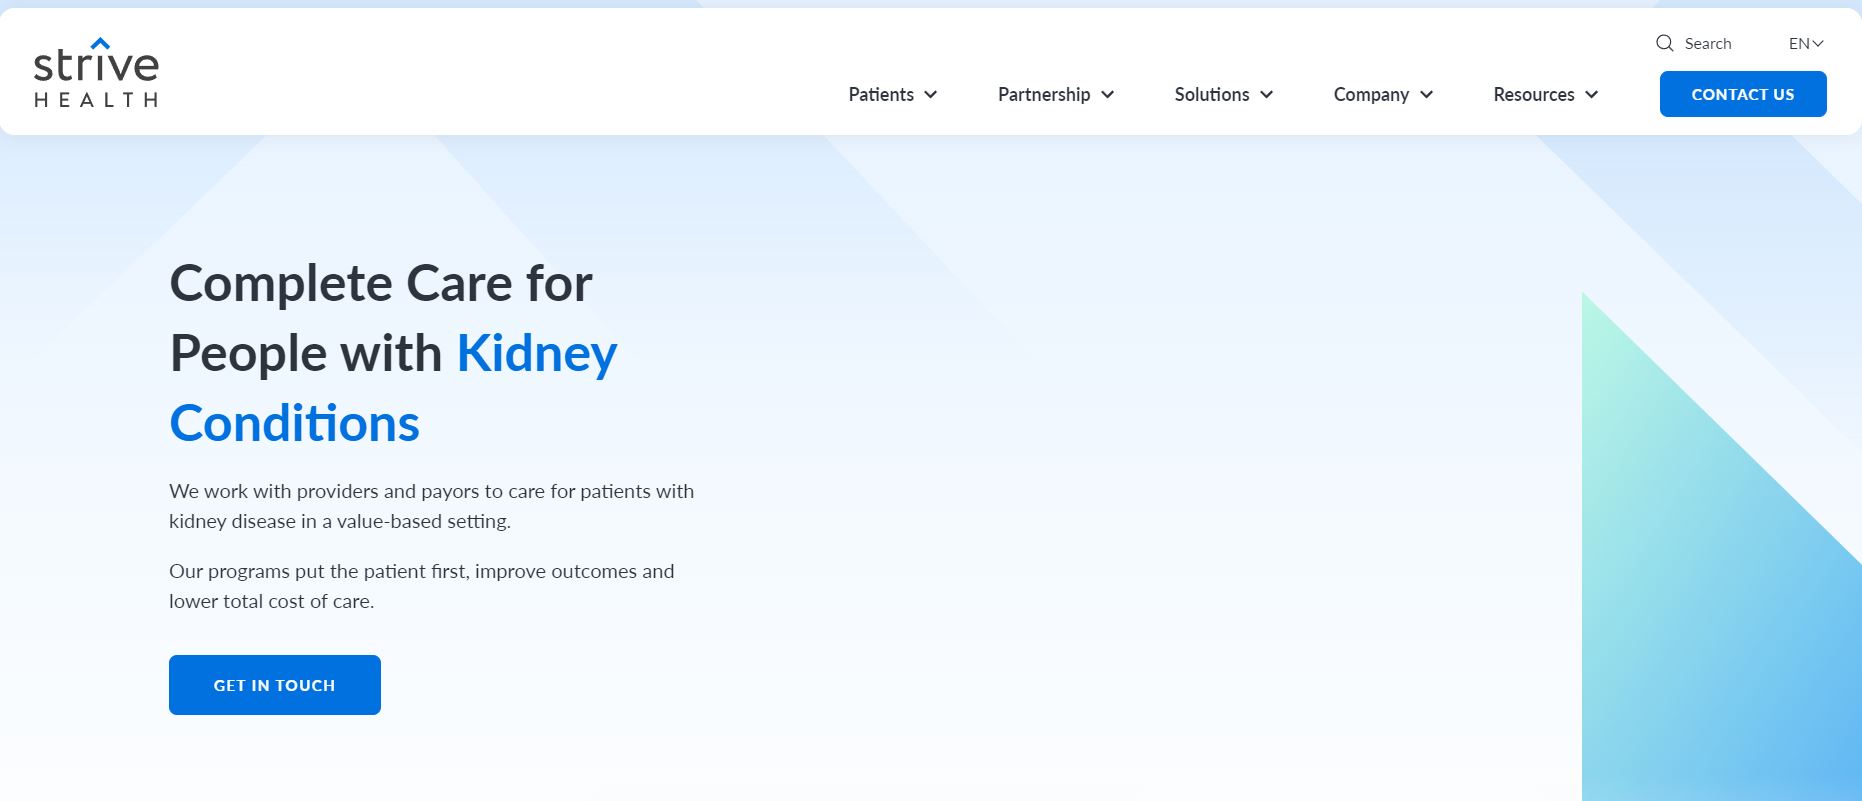 Discover the future of value-based kidney care with Strive Health, a startup that has secured $166 million in Series C funding